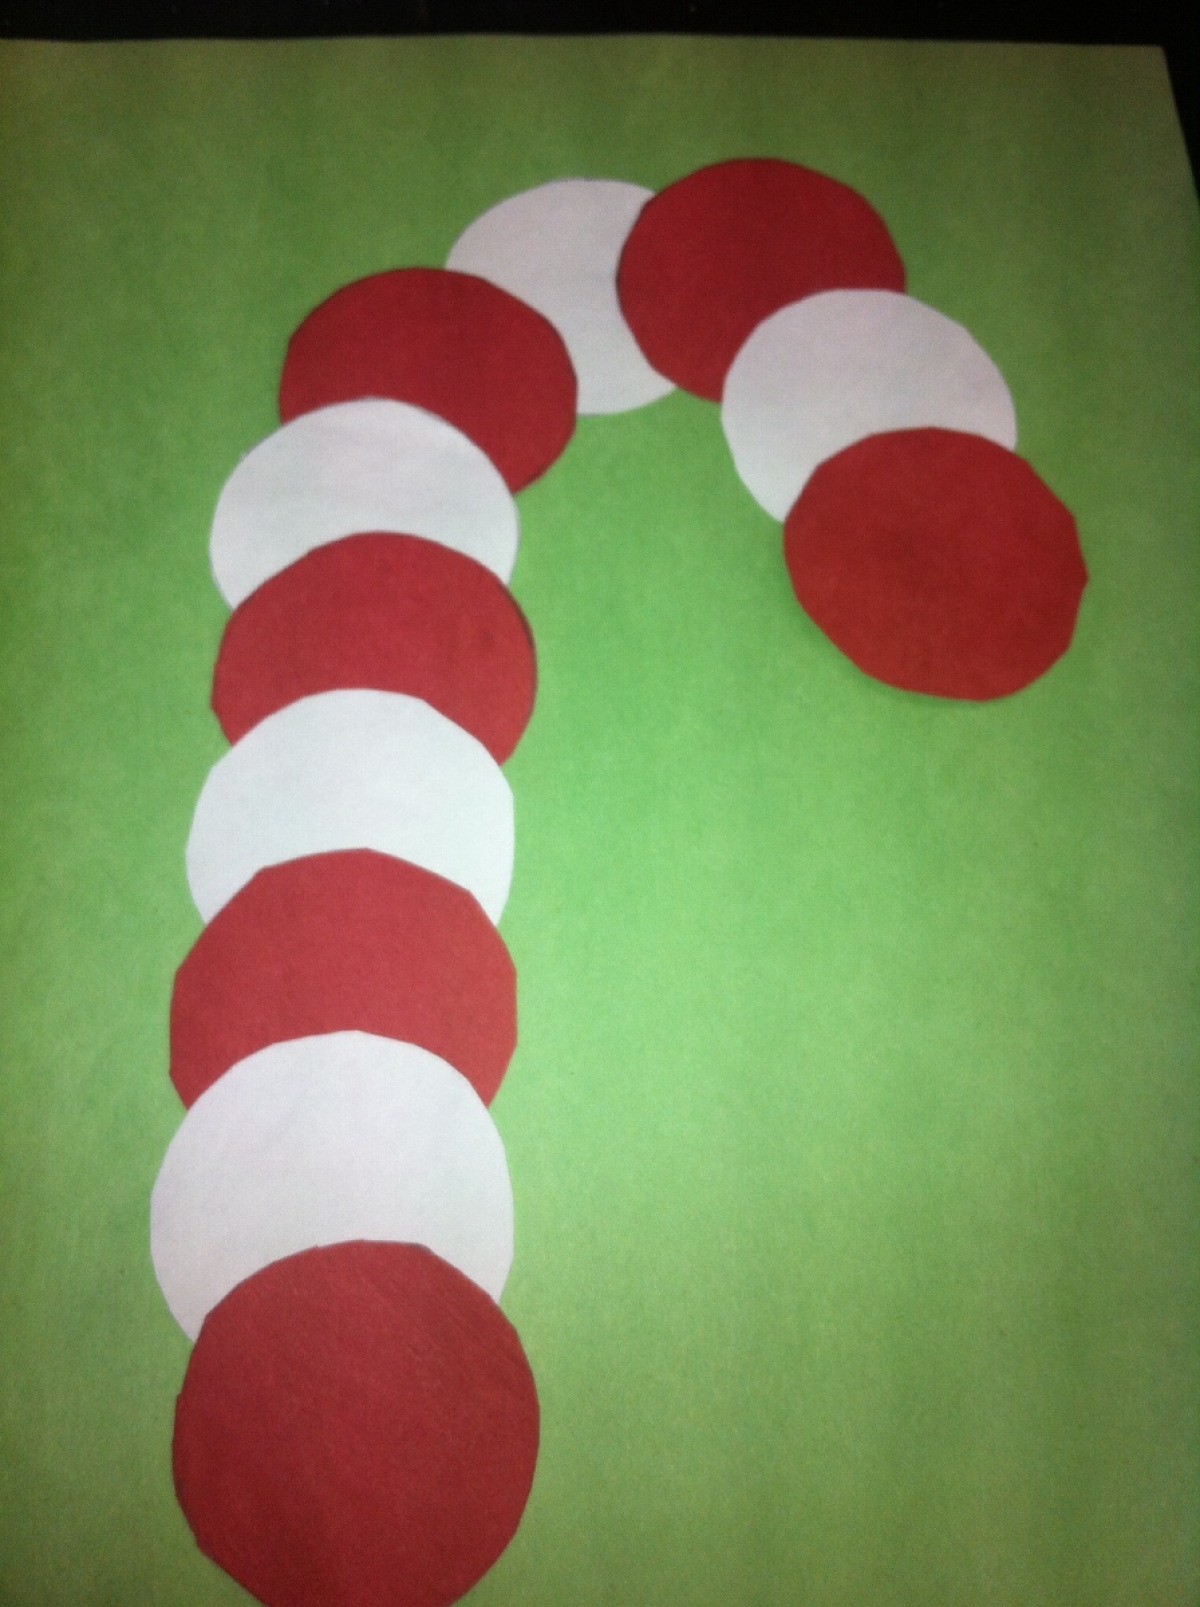 Candy Cane Shaped Crafts for Kids | My Frugal Christmas